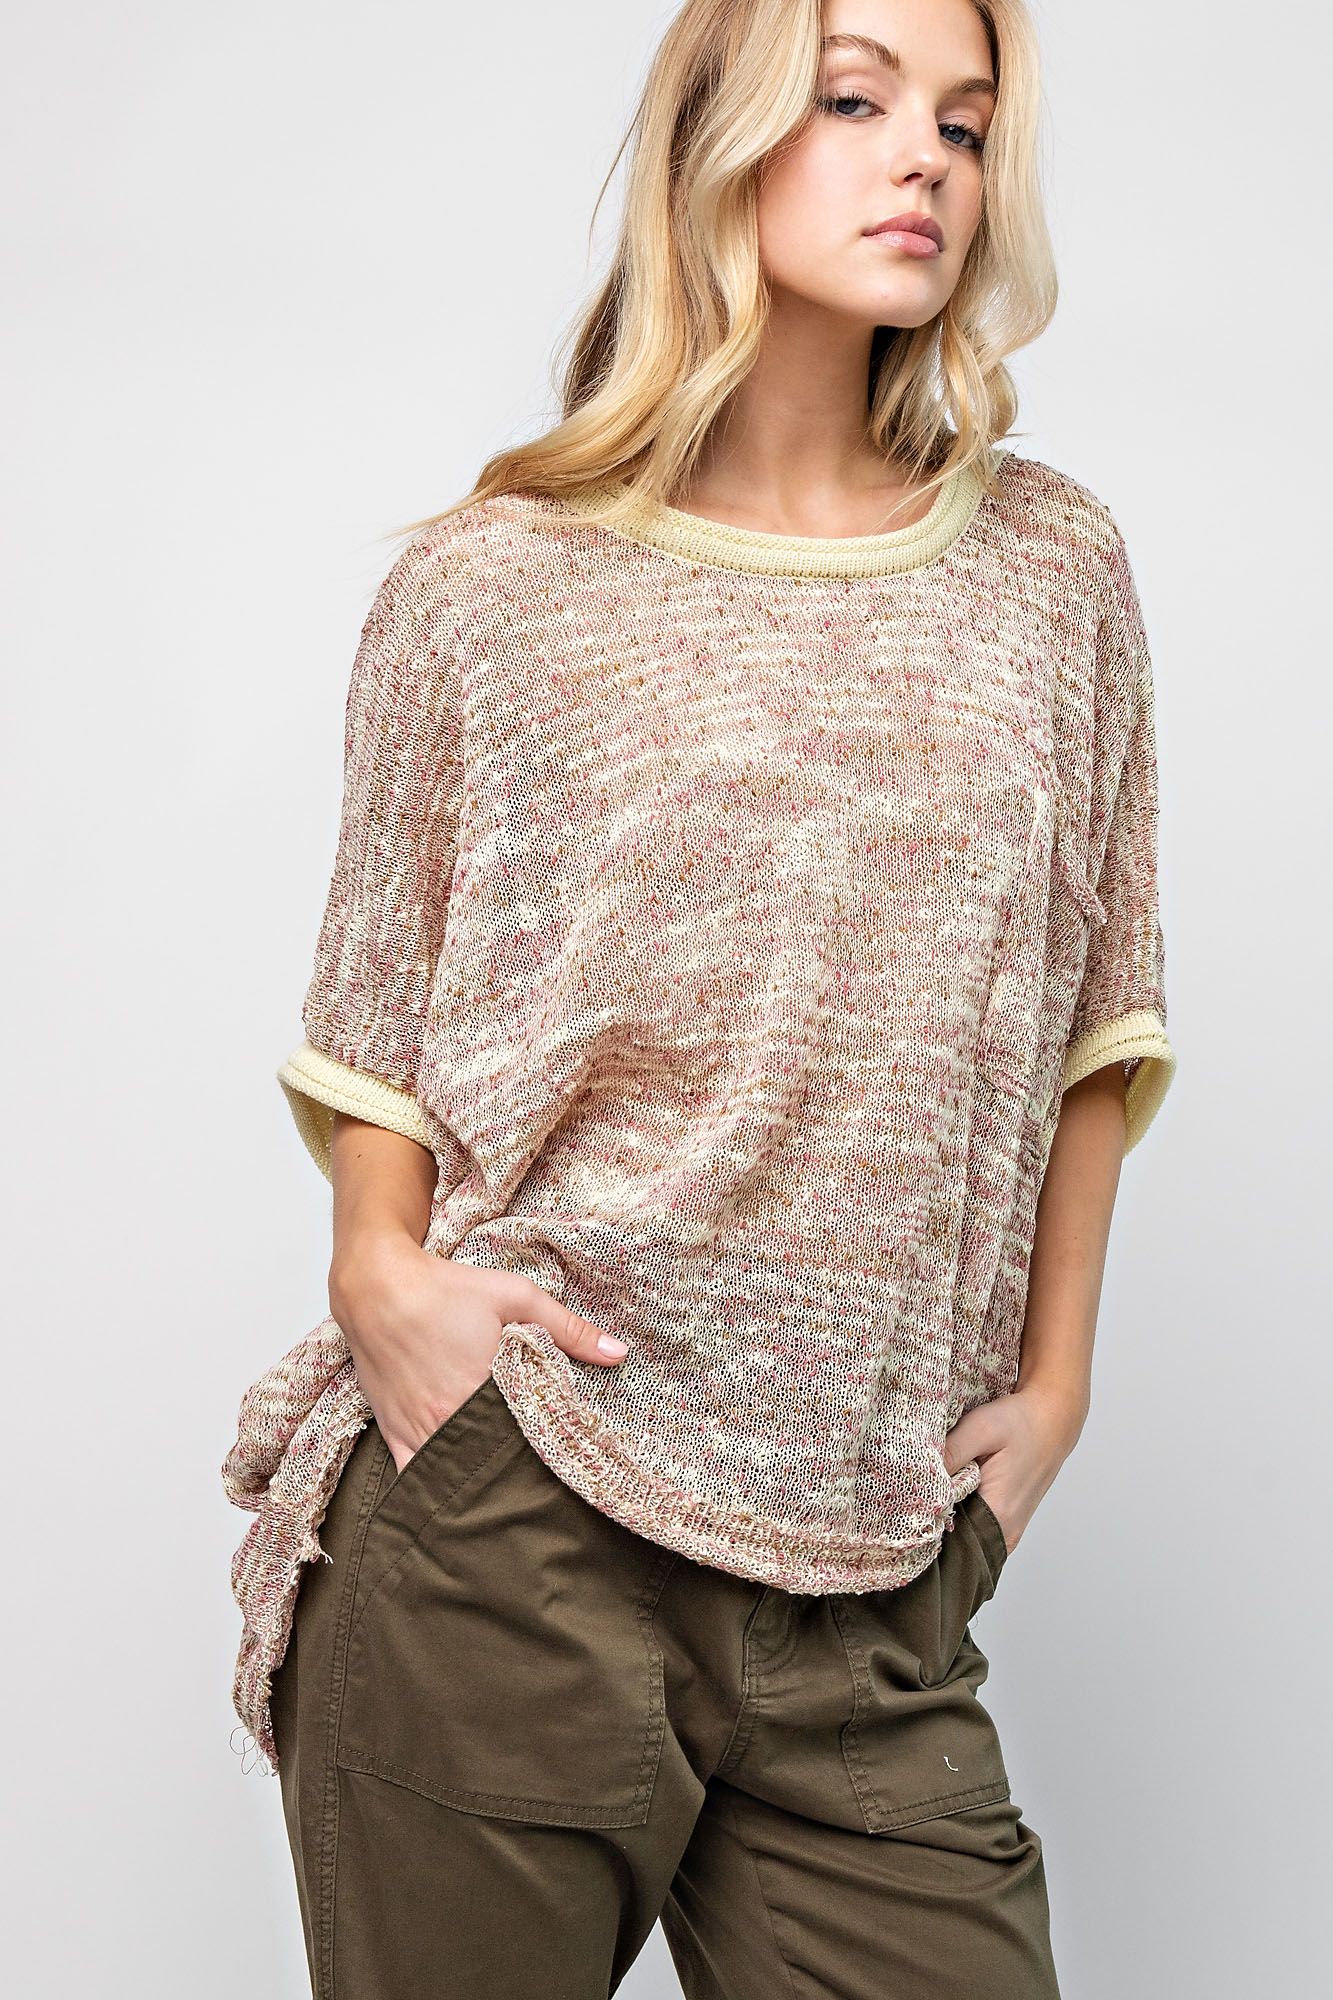 Easel Plus Multi Color Dolman Sleeves Thin Sweater Tops